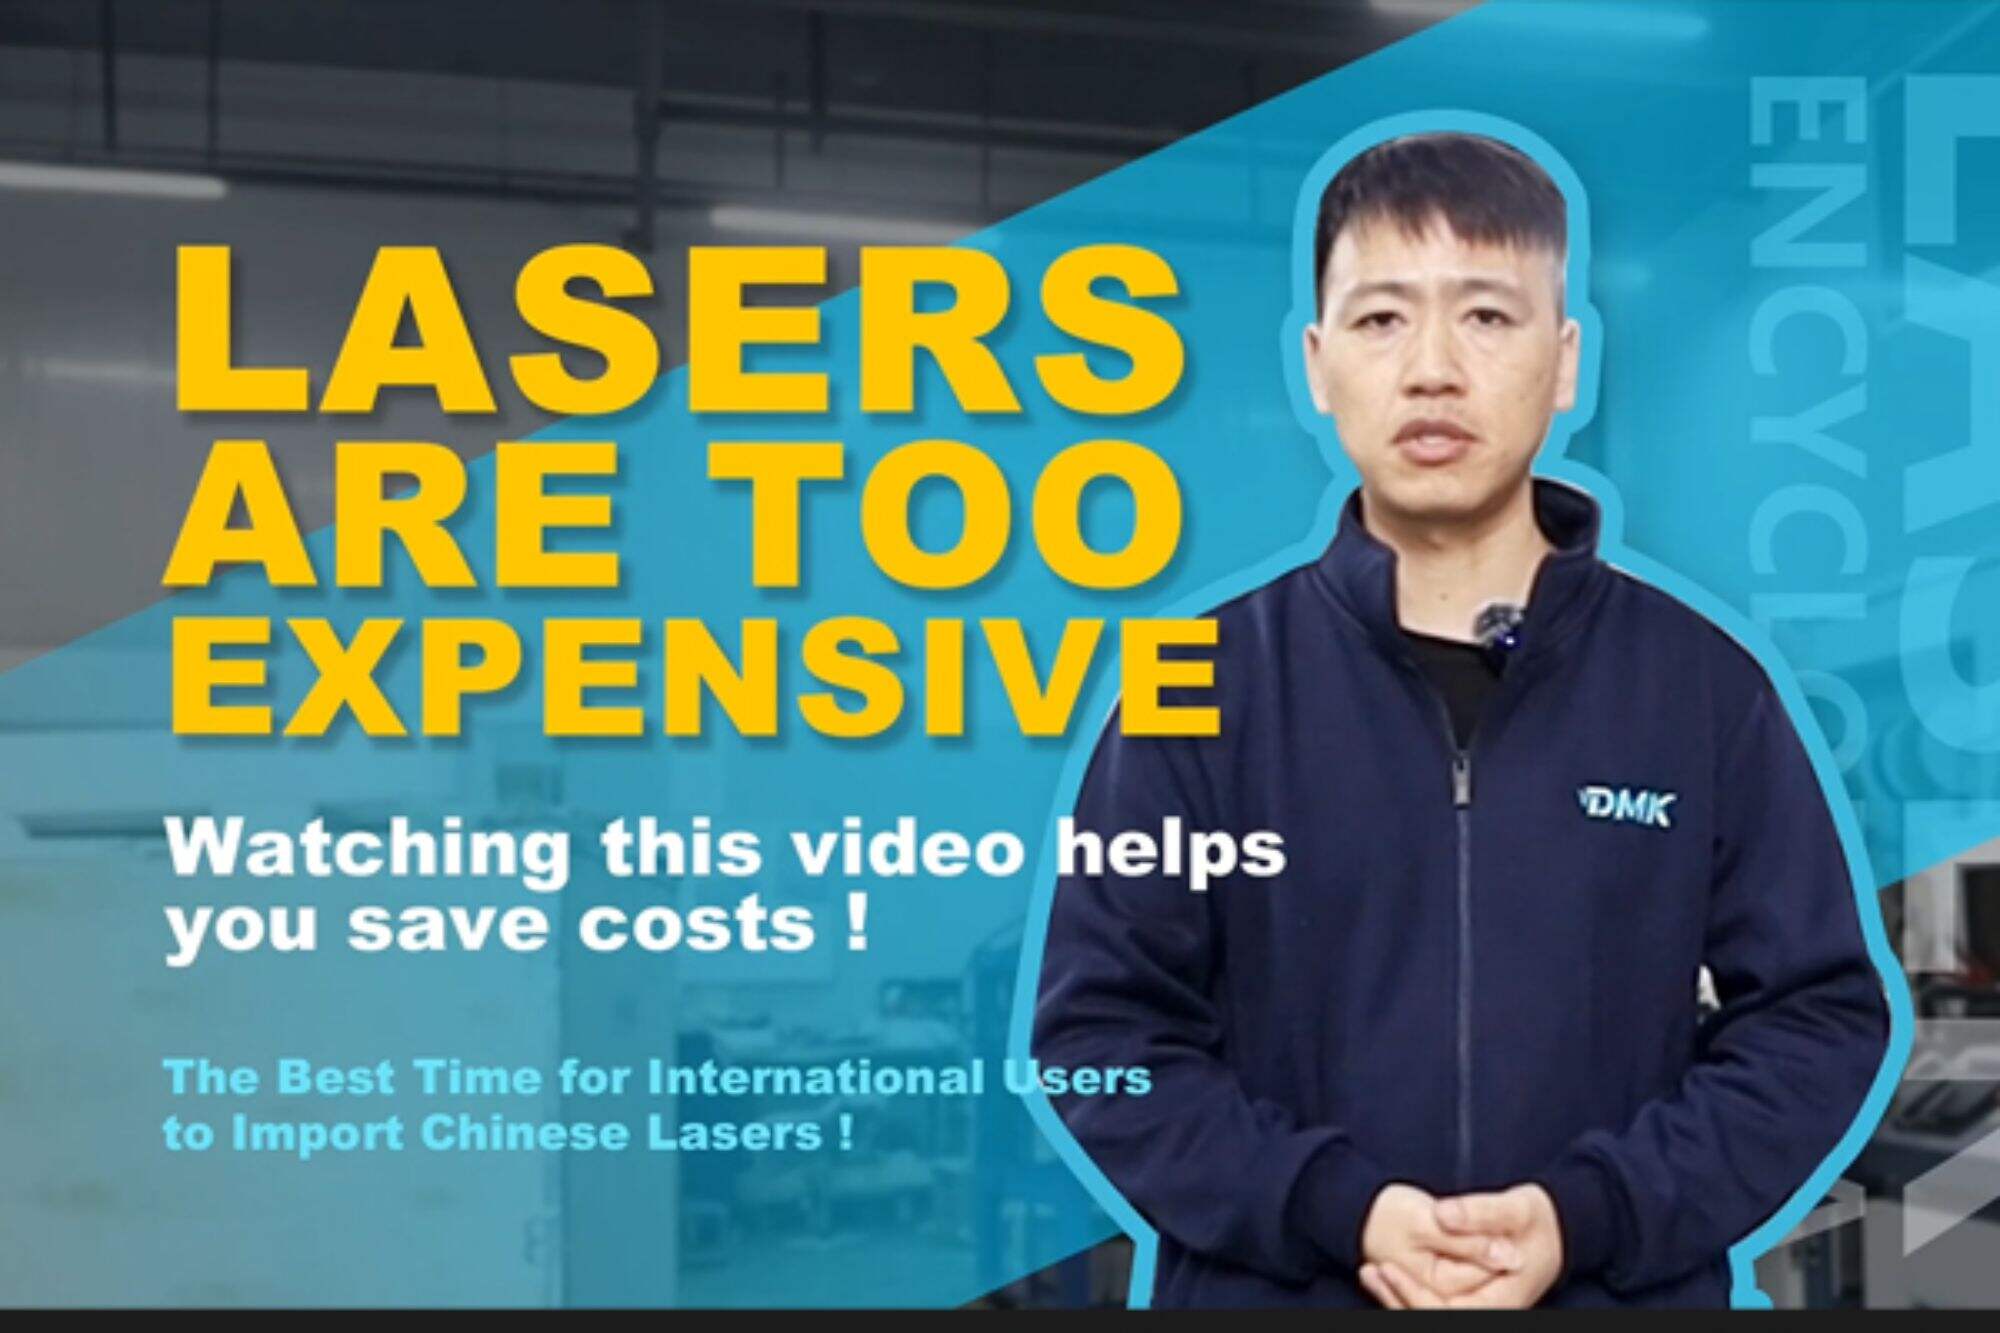 lasers are too expensive ! watching this video helps you save costs!